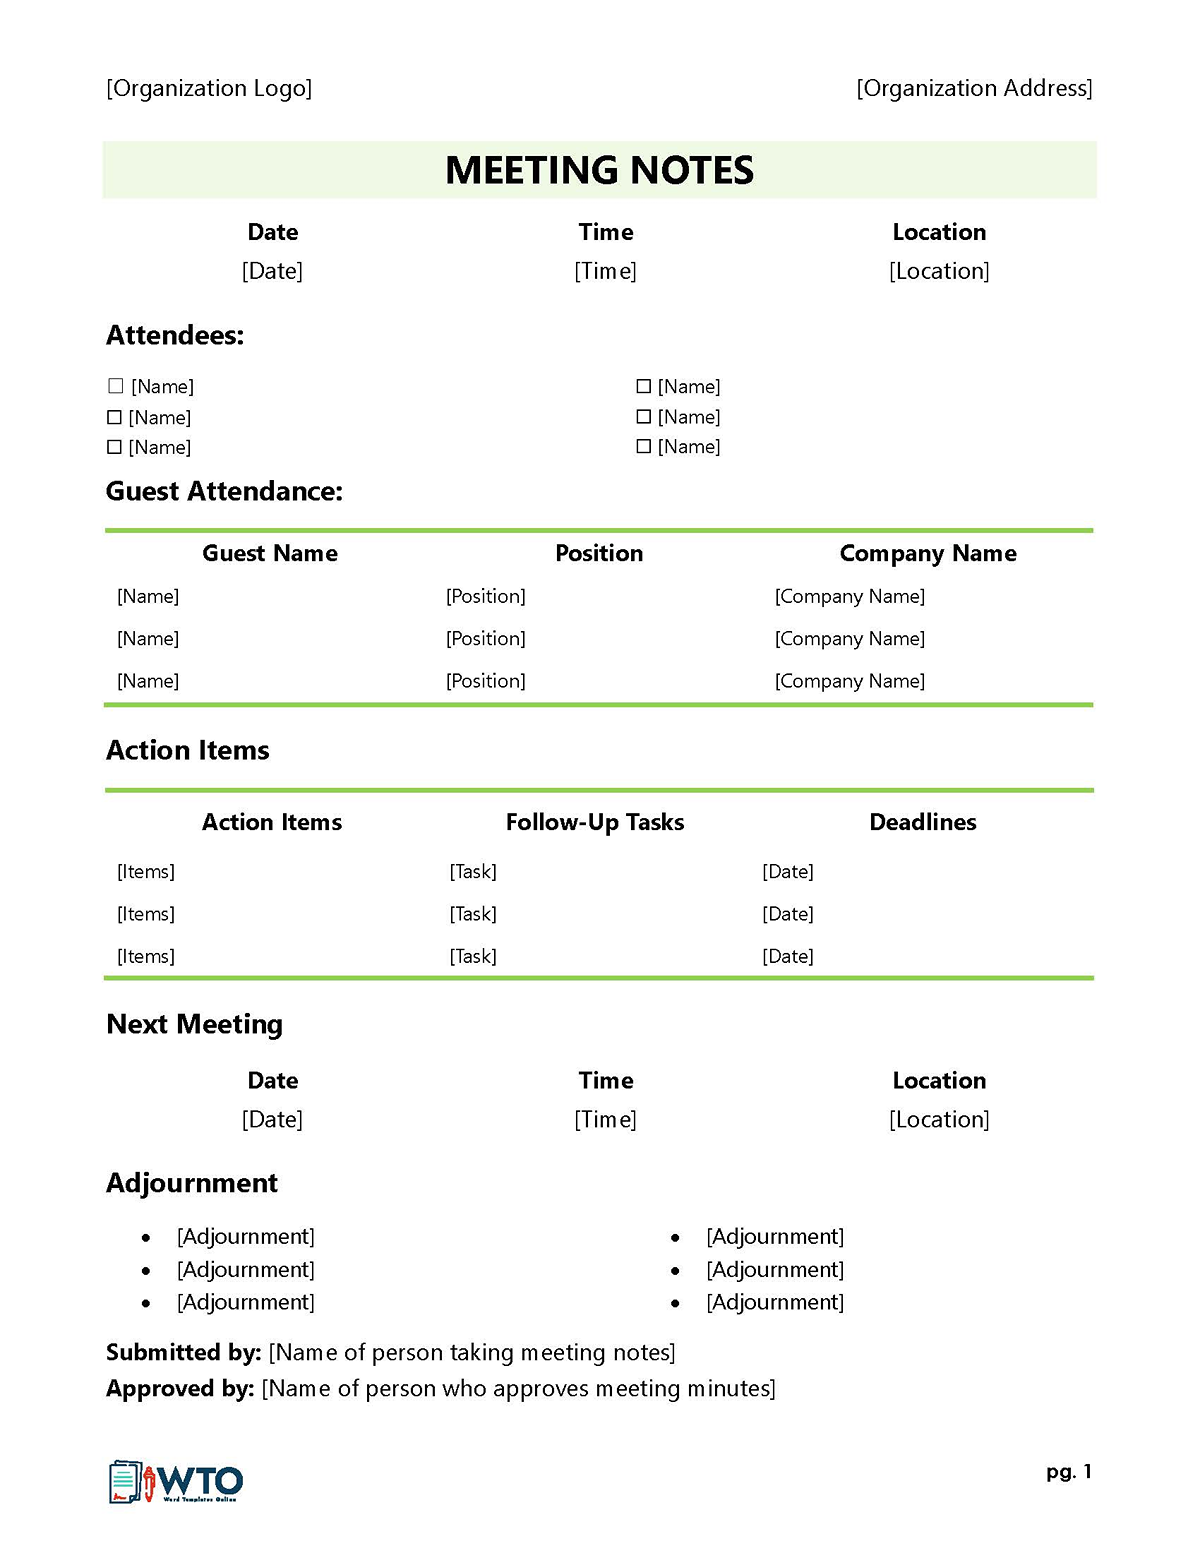 Meeting Agenda Template - Ready-to-Use Word Document